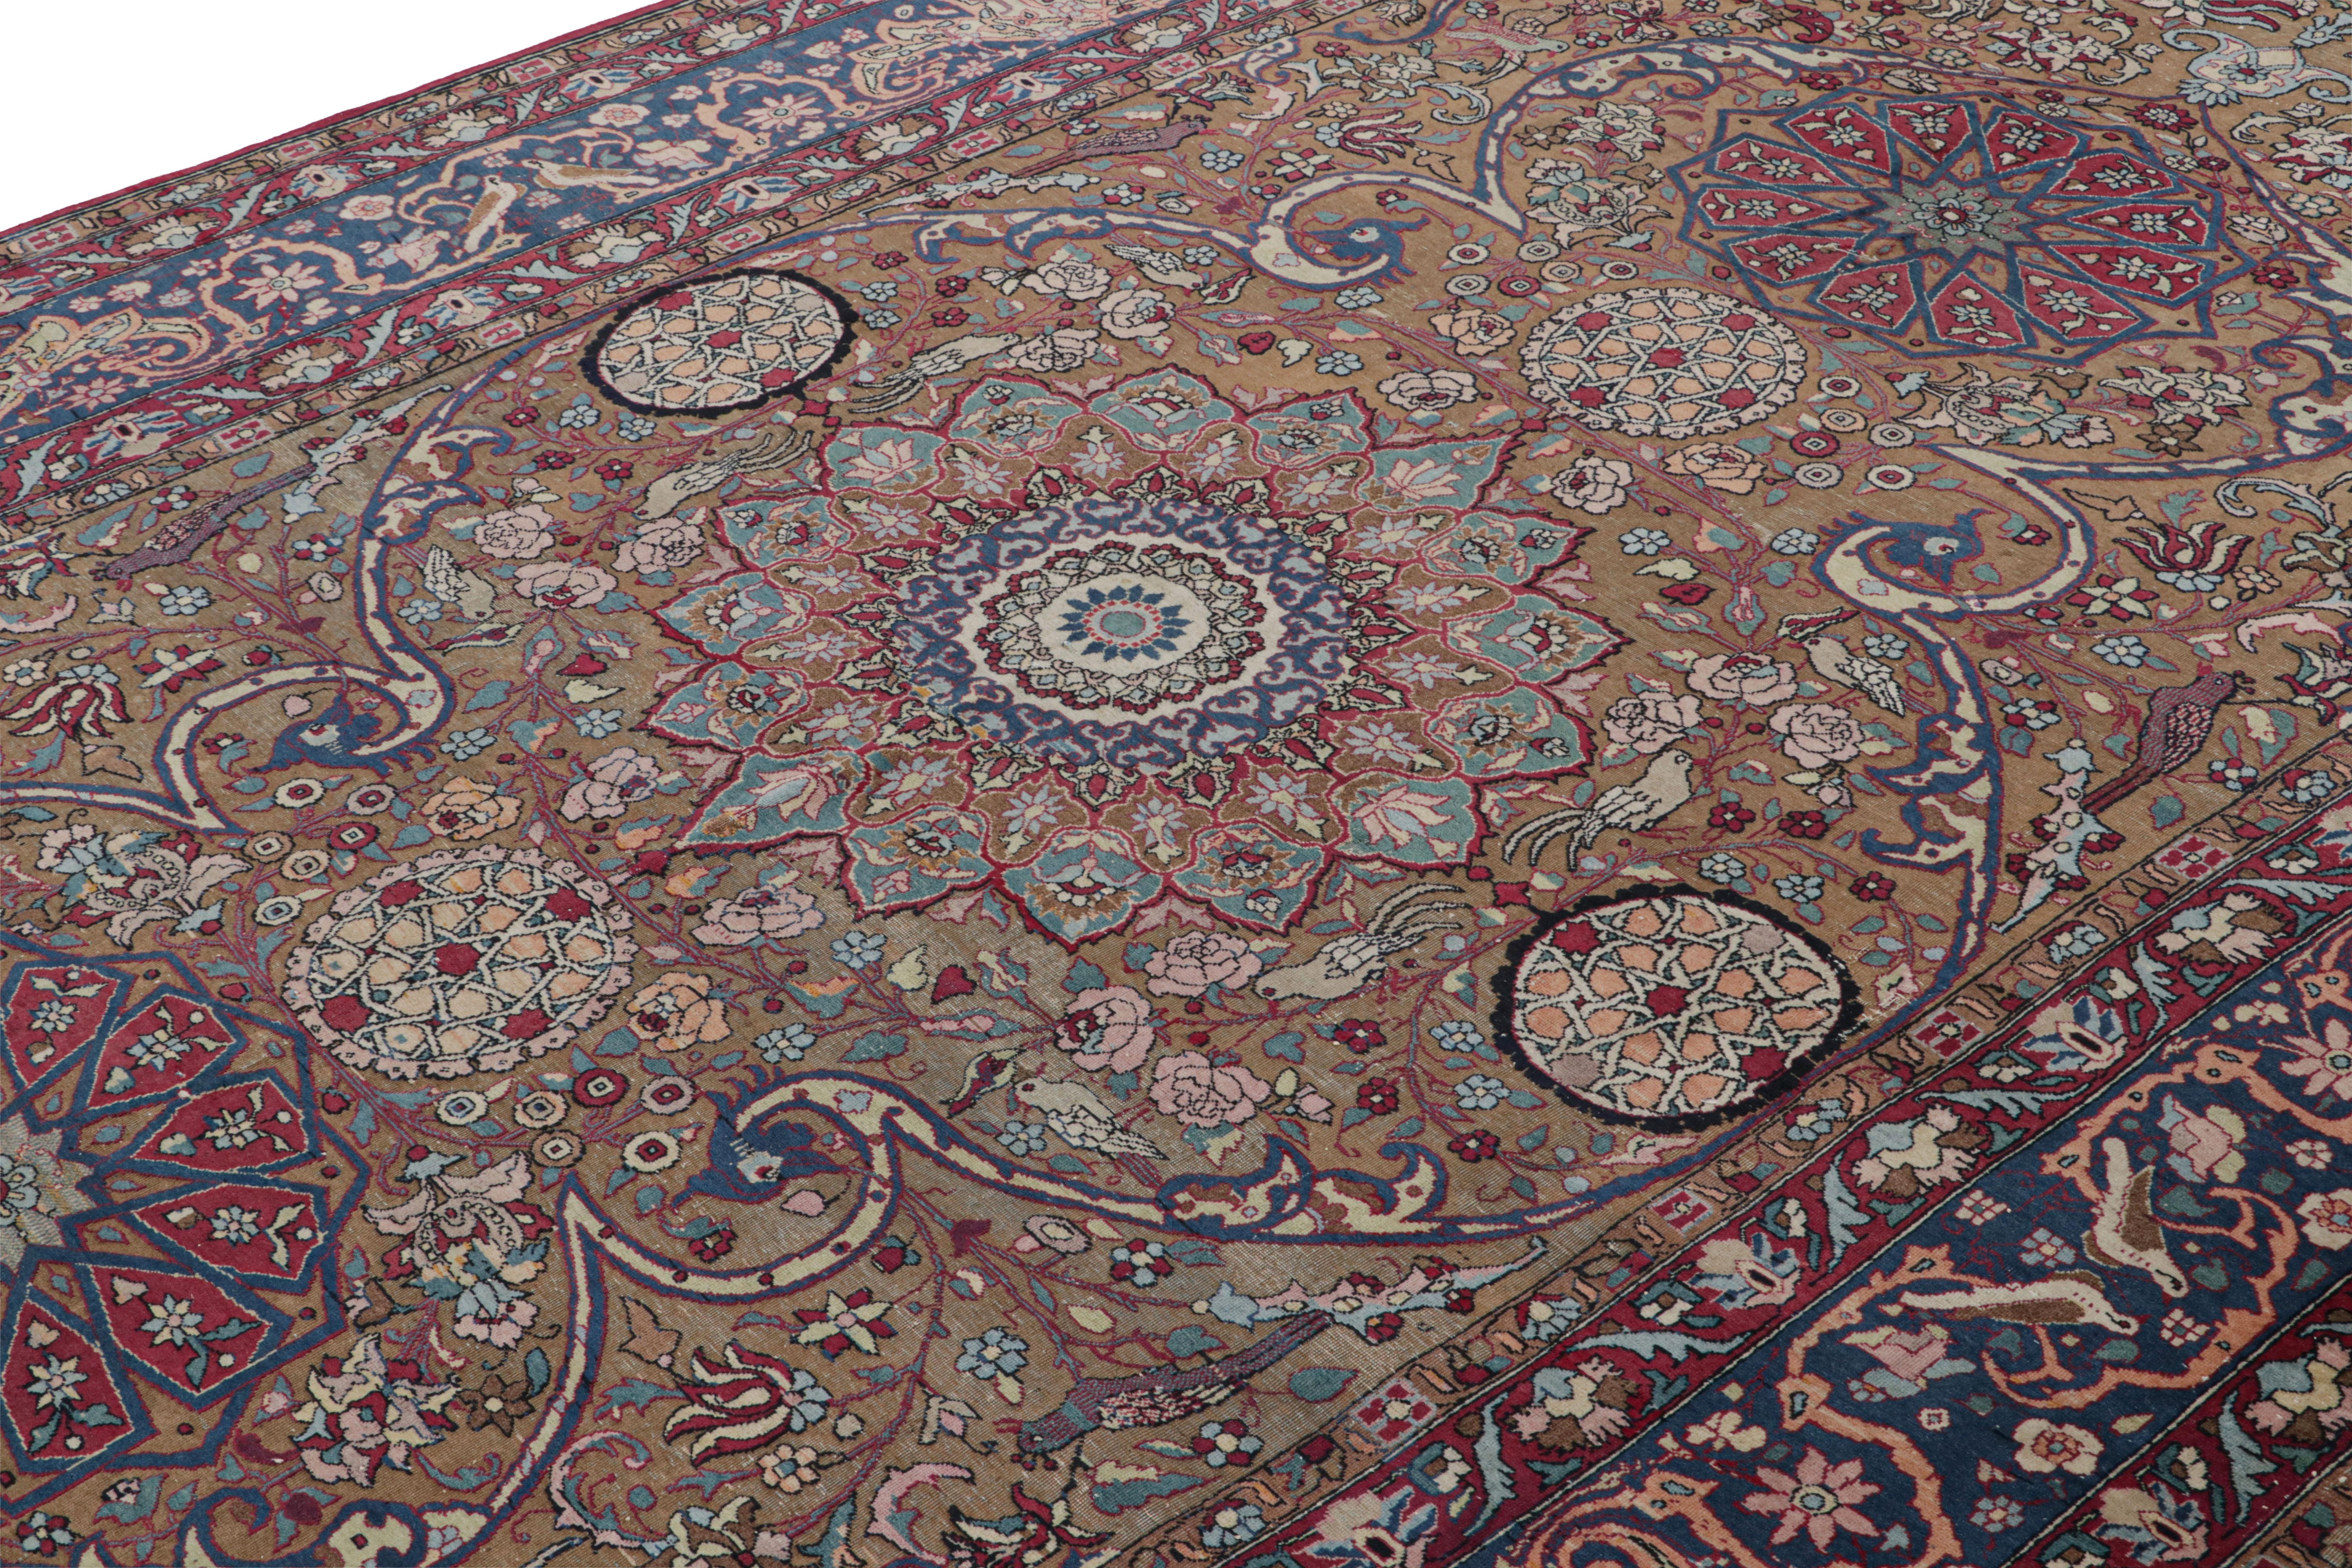 Antique Persian Rug in Chocolate Brown with Floral Medallions In Good Condition For Sale In Long Island City, NY